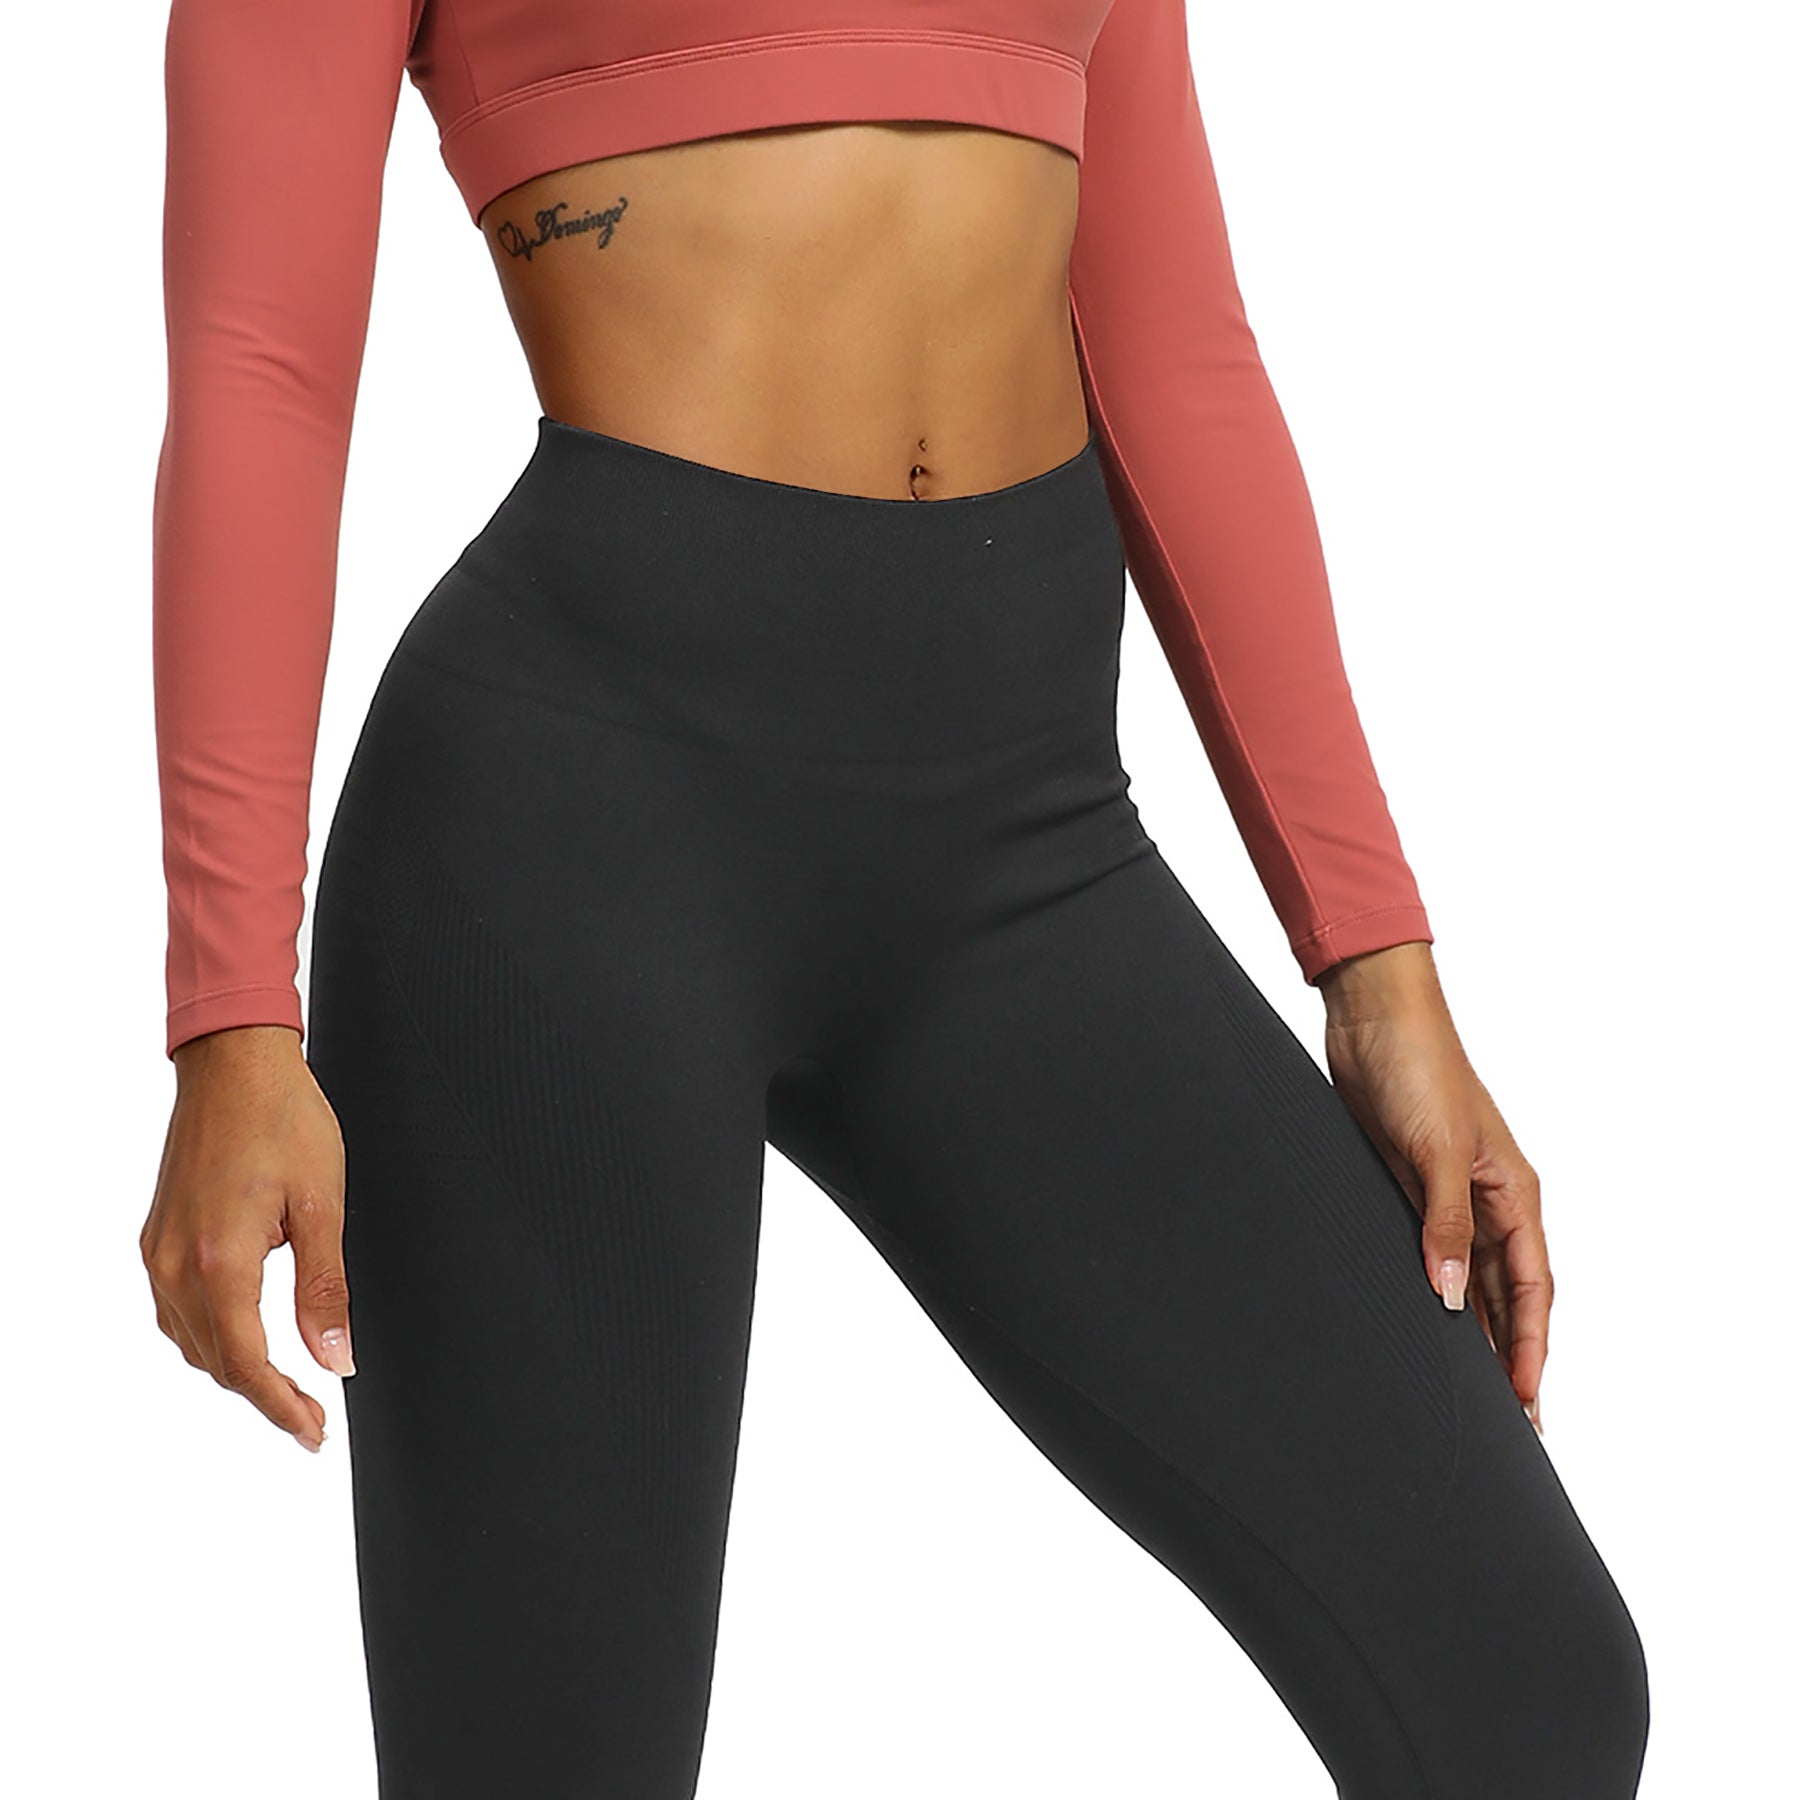 Aoxjox Carbon Collection Leggings